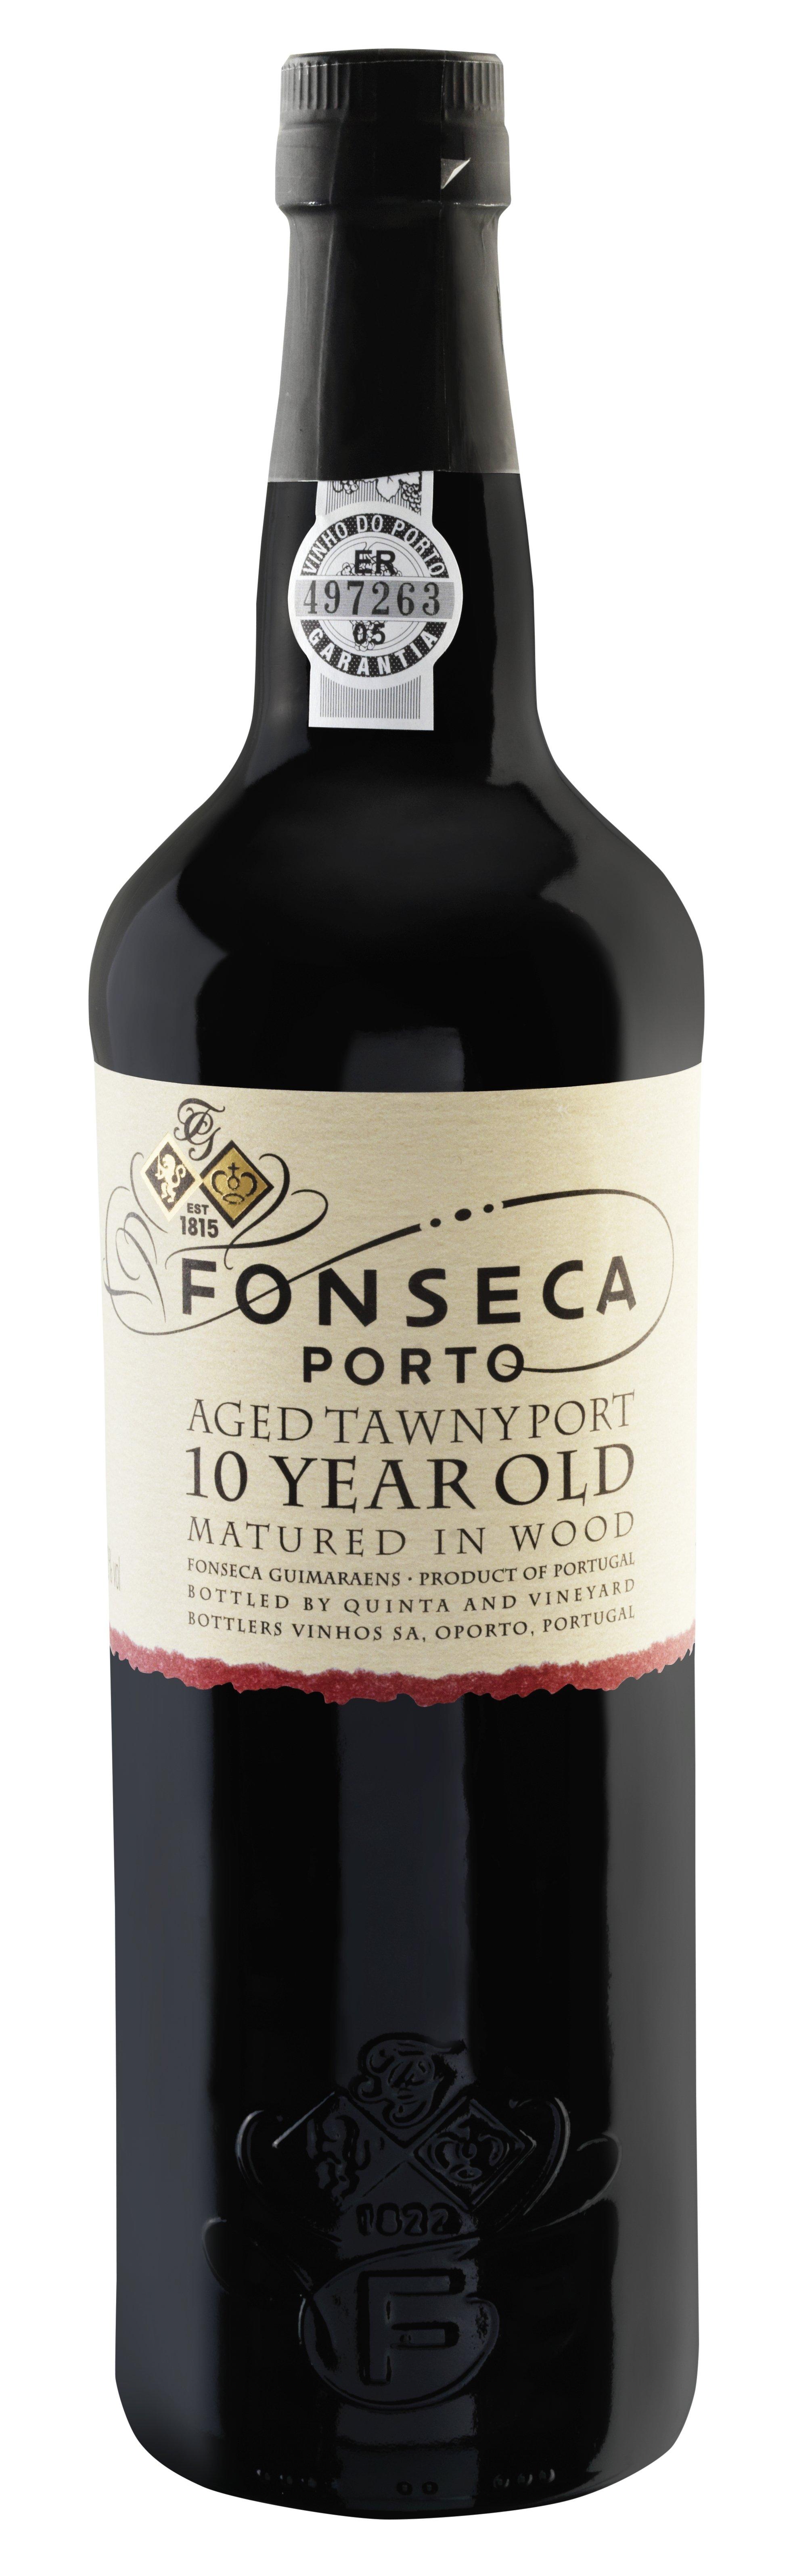 Image of Fonseca Porto 10 year old Tawny - 75 cl